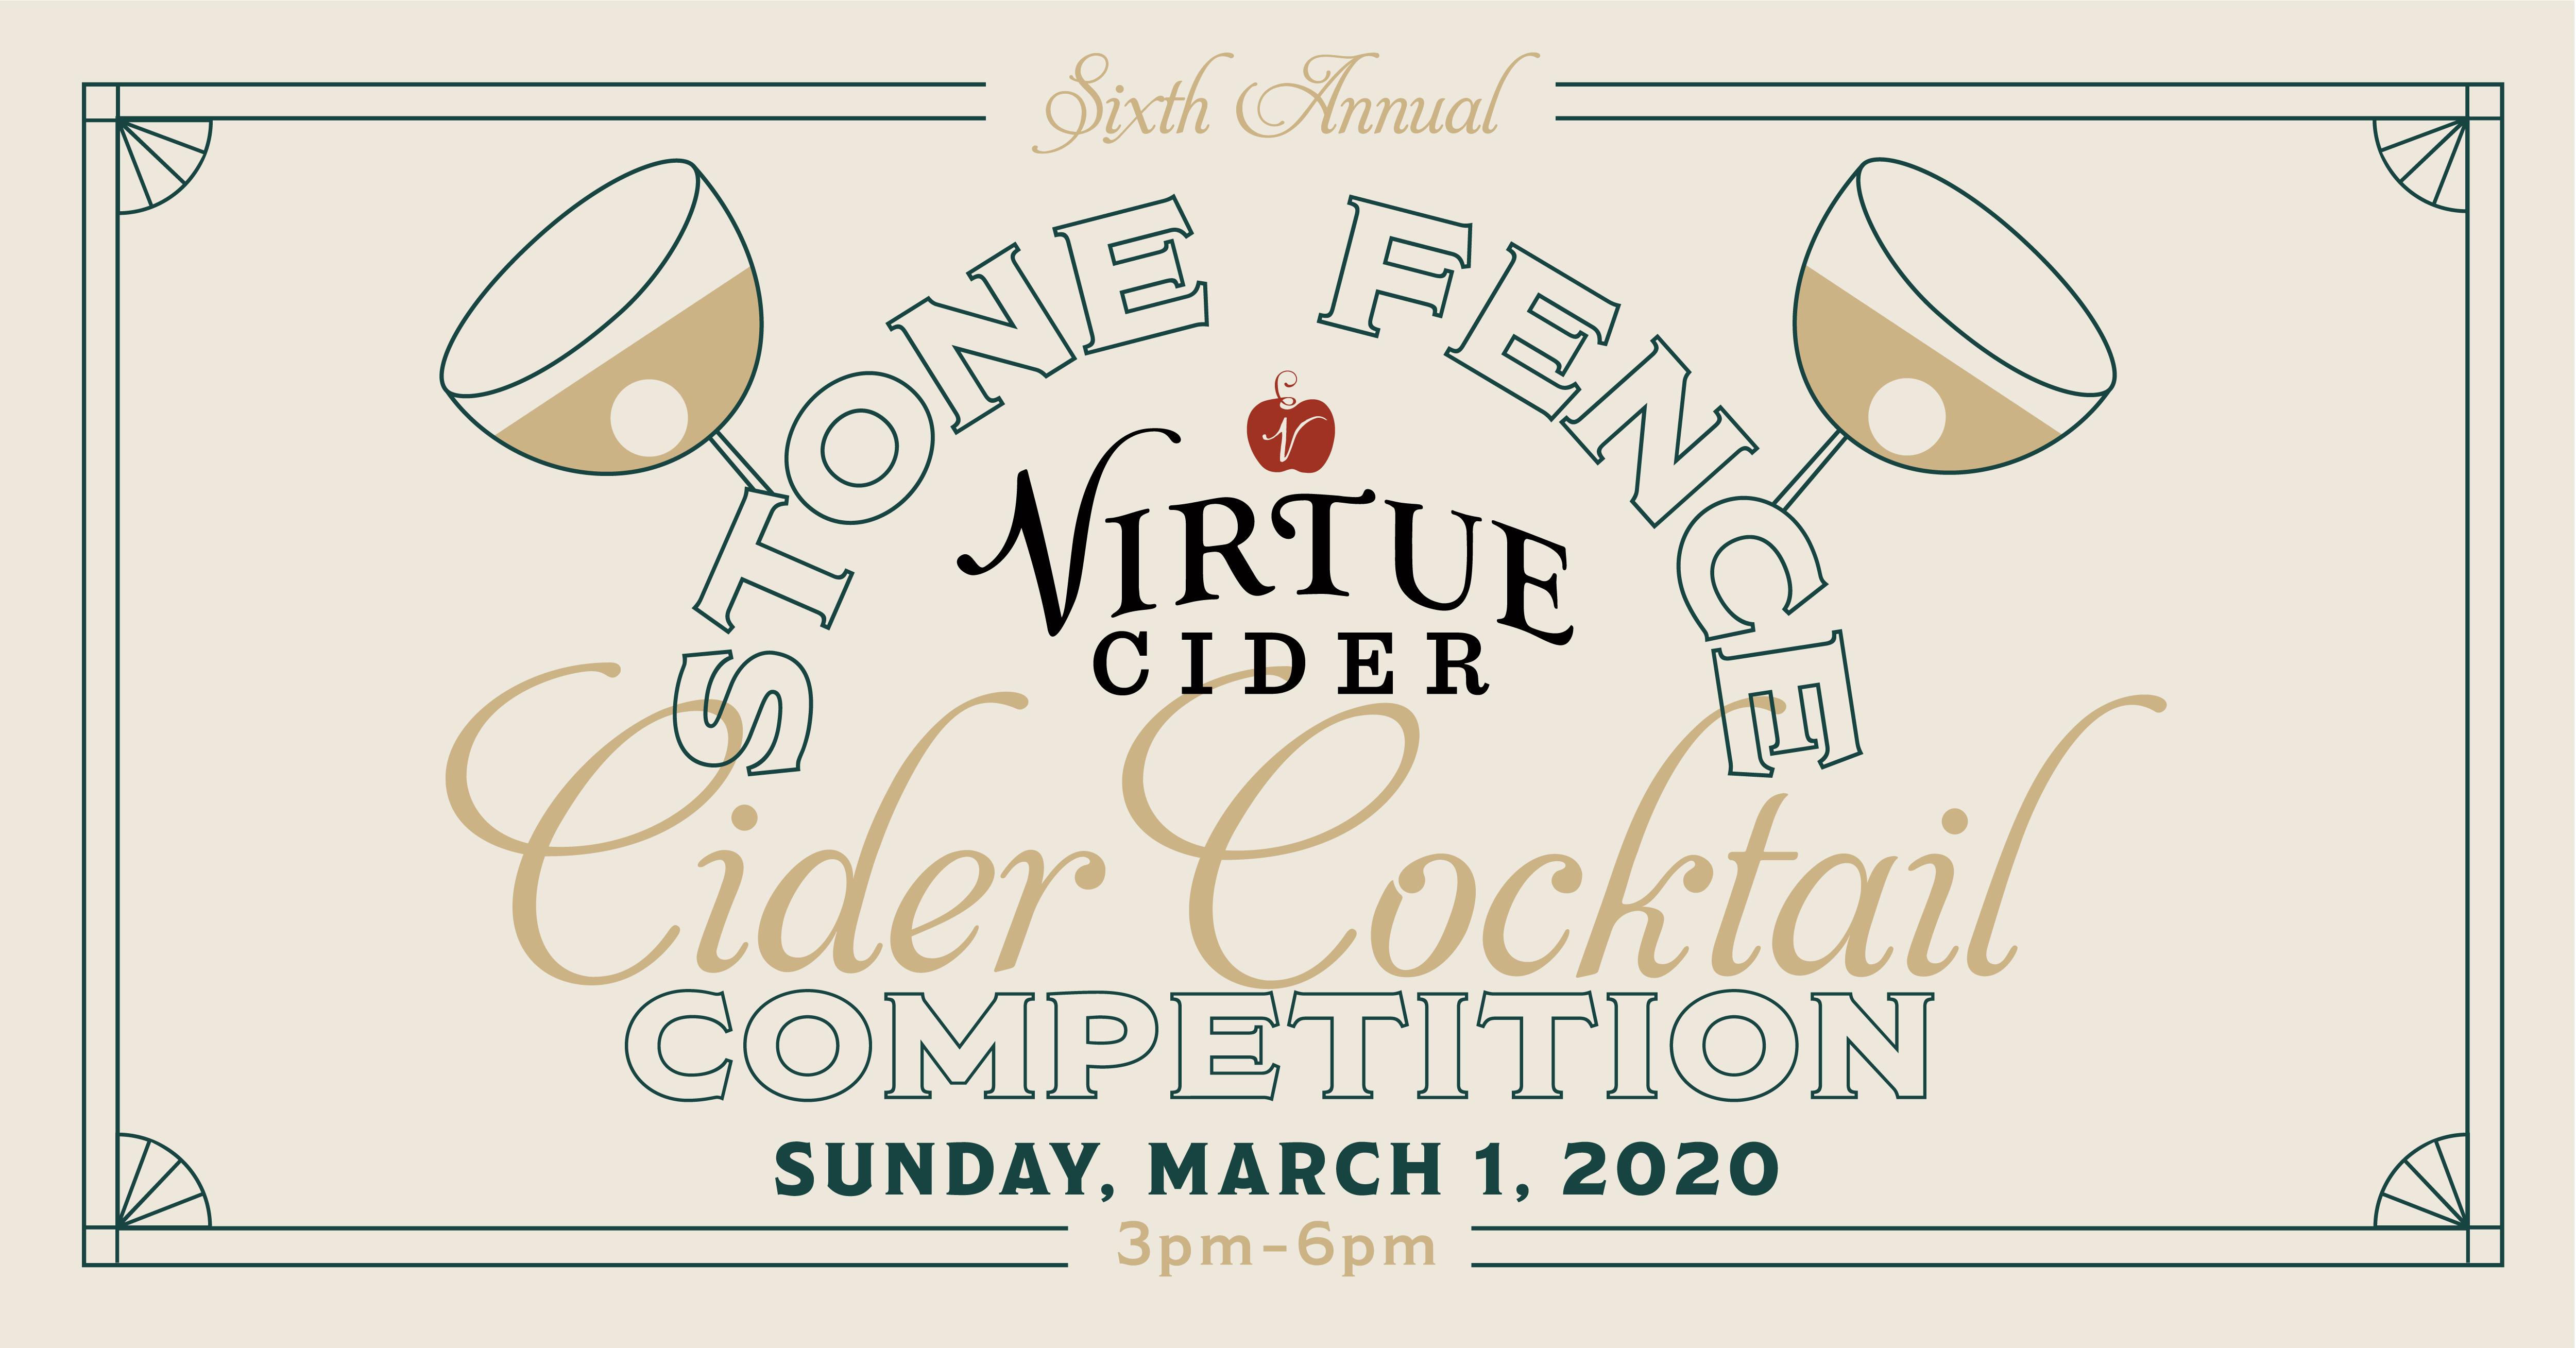 6th Annual Stone Fence Cider Cocktail Competition